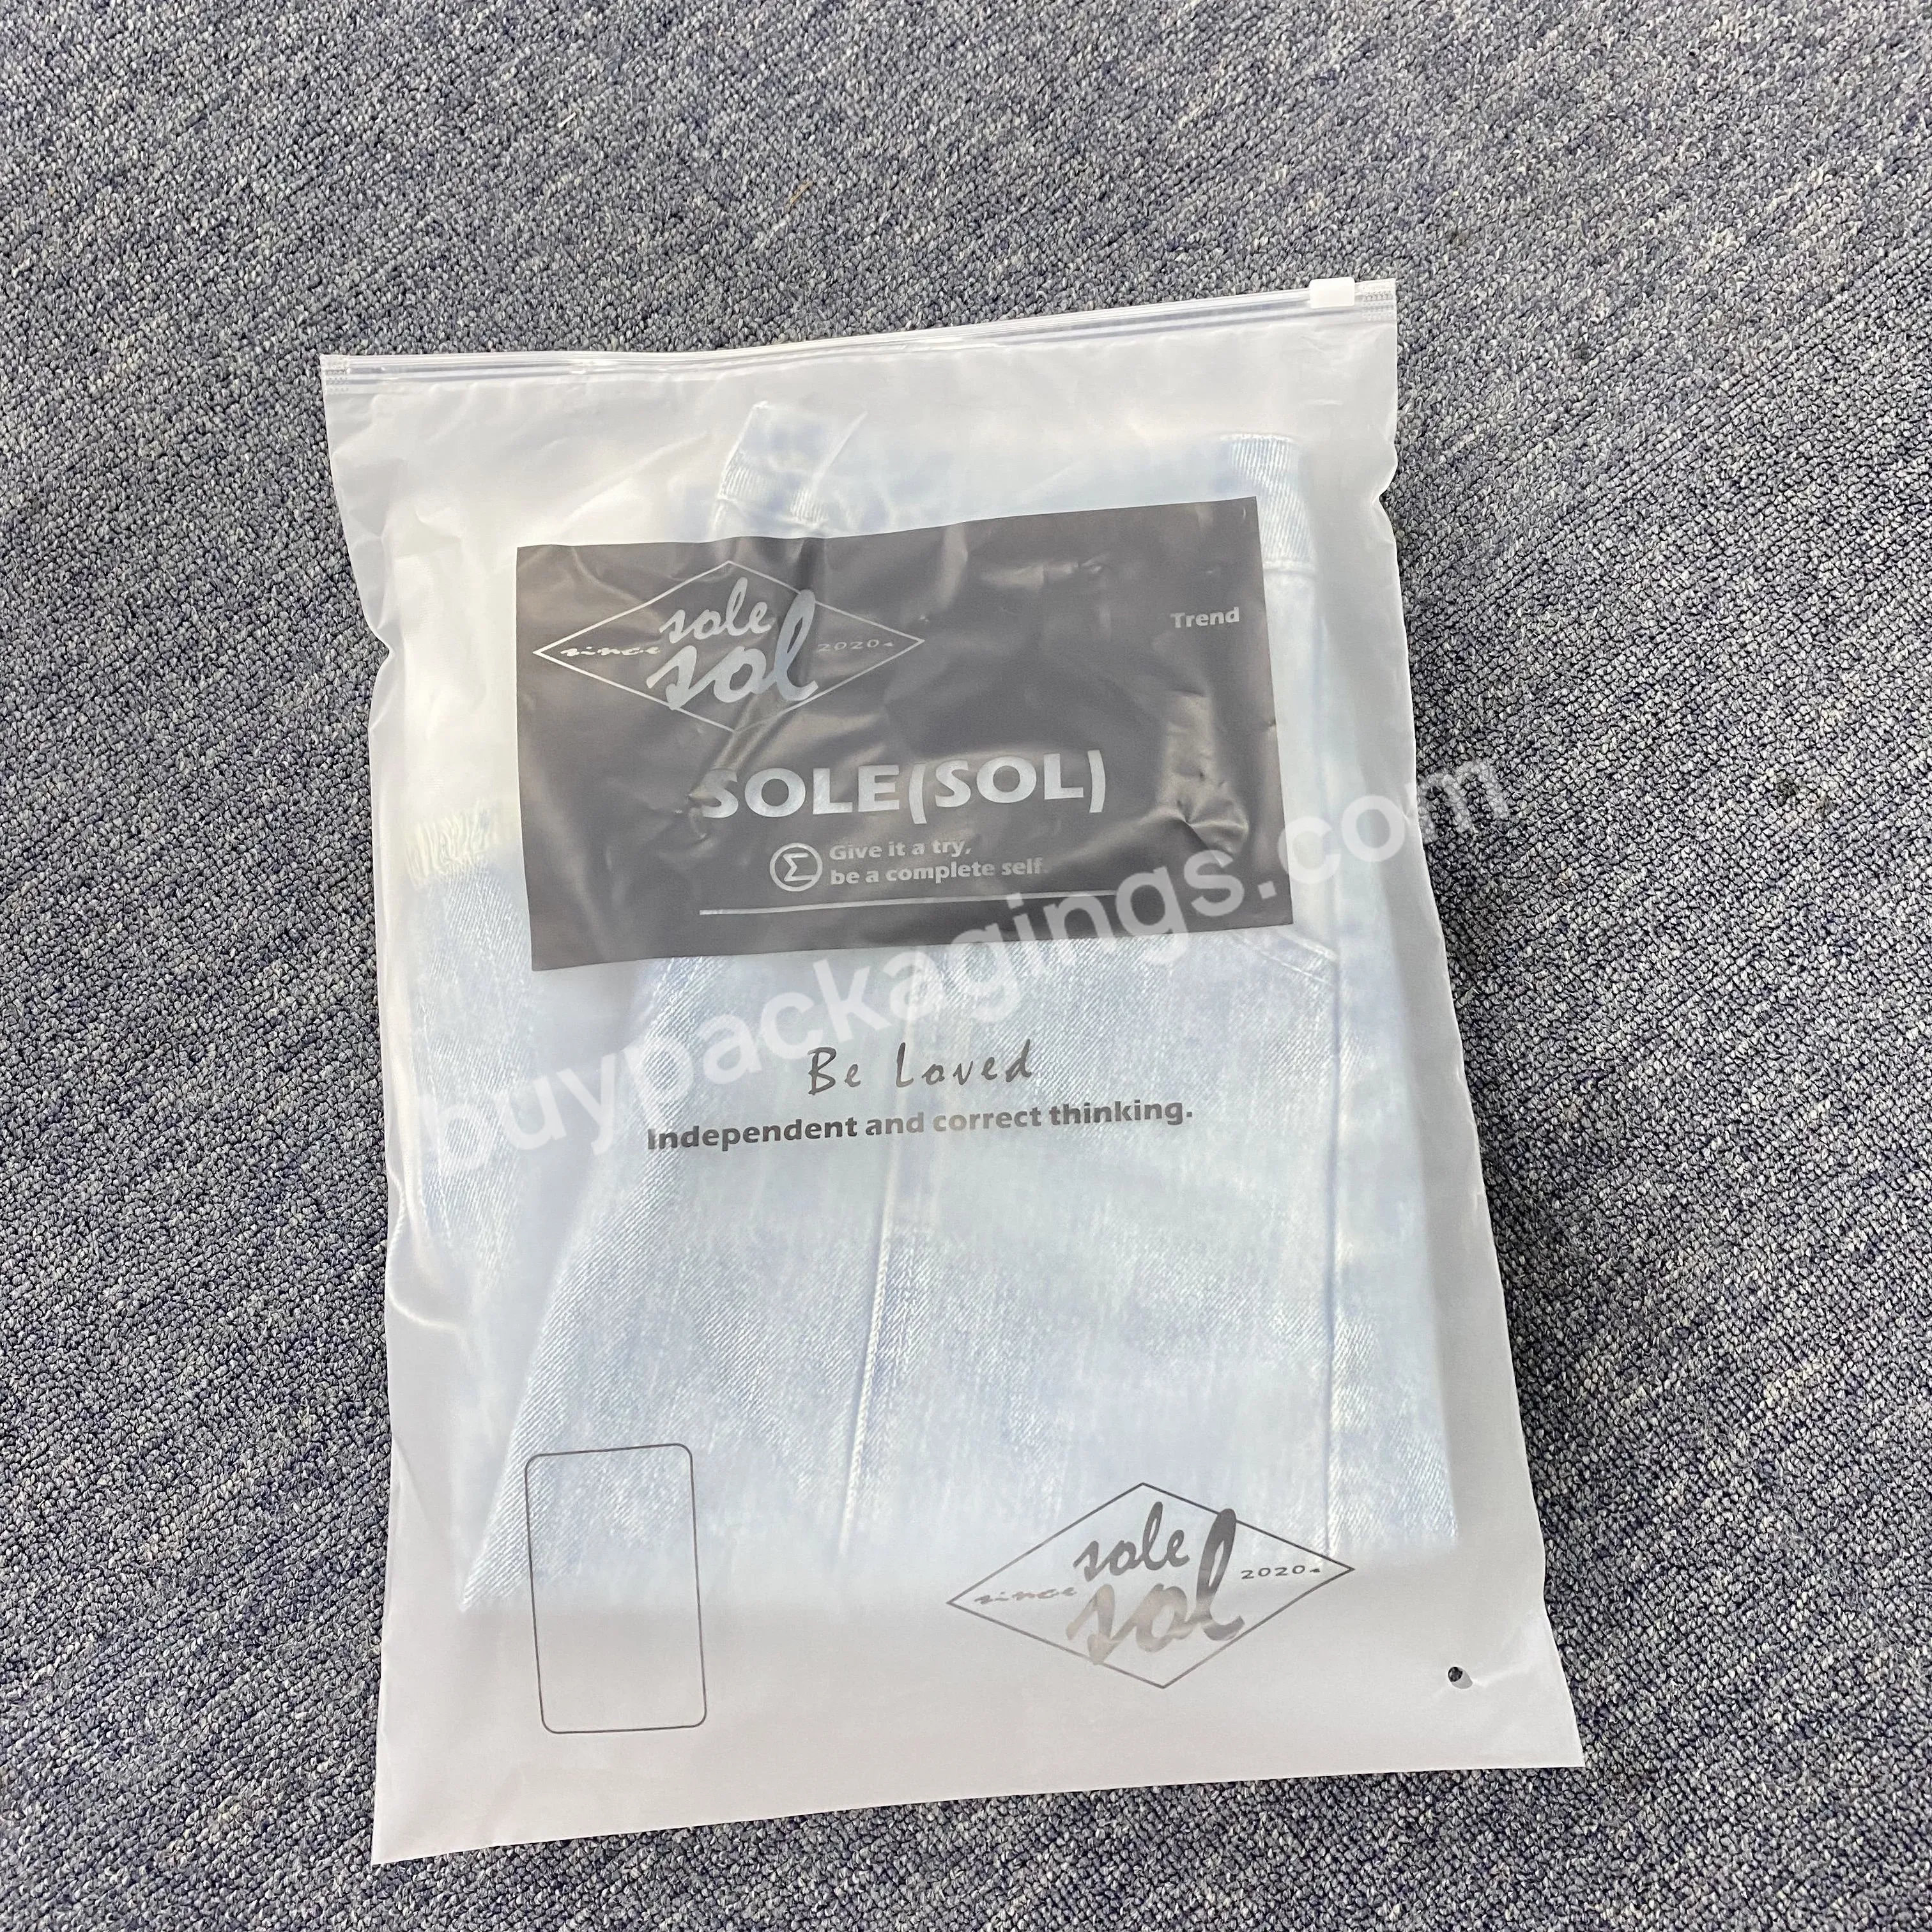 China Wholesale 2023 New Design Frosted Zipper Bag With Brand Custom Size Logo Print Recyclable Waterproof Shipping Packaging - Buy New Design Frosted Zipper Bag With Brand,Custom Size Logo Print,Recyclable Waterproof Shipping Packaging.